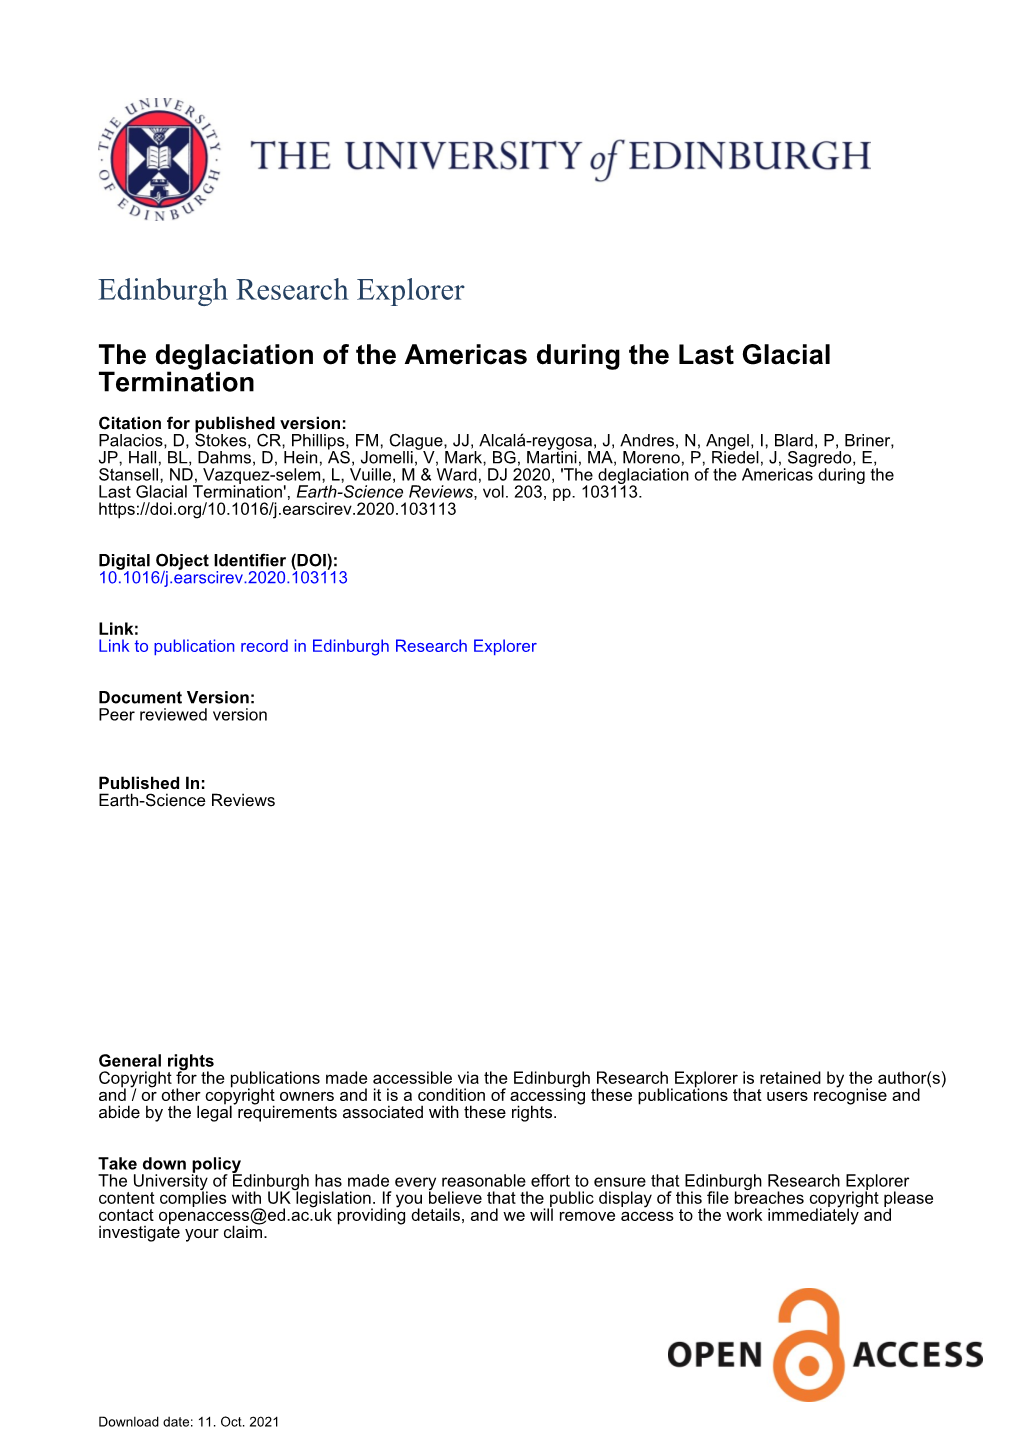 The Deglaciation of the Americas During the Last Glacial Termination', Earth-Science Reviews, Vol